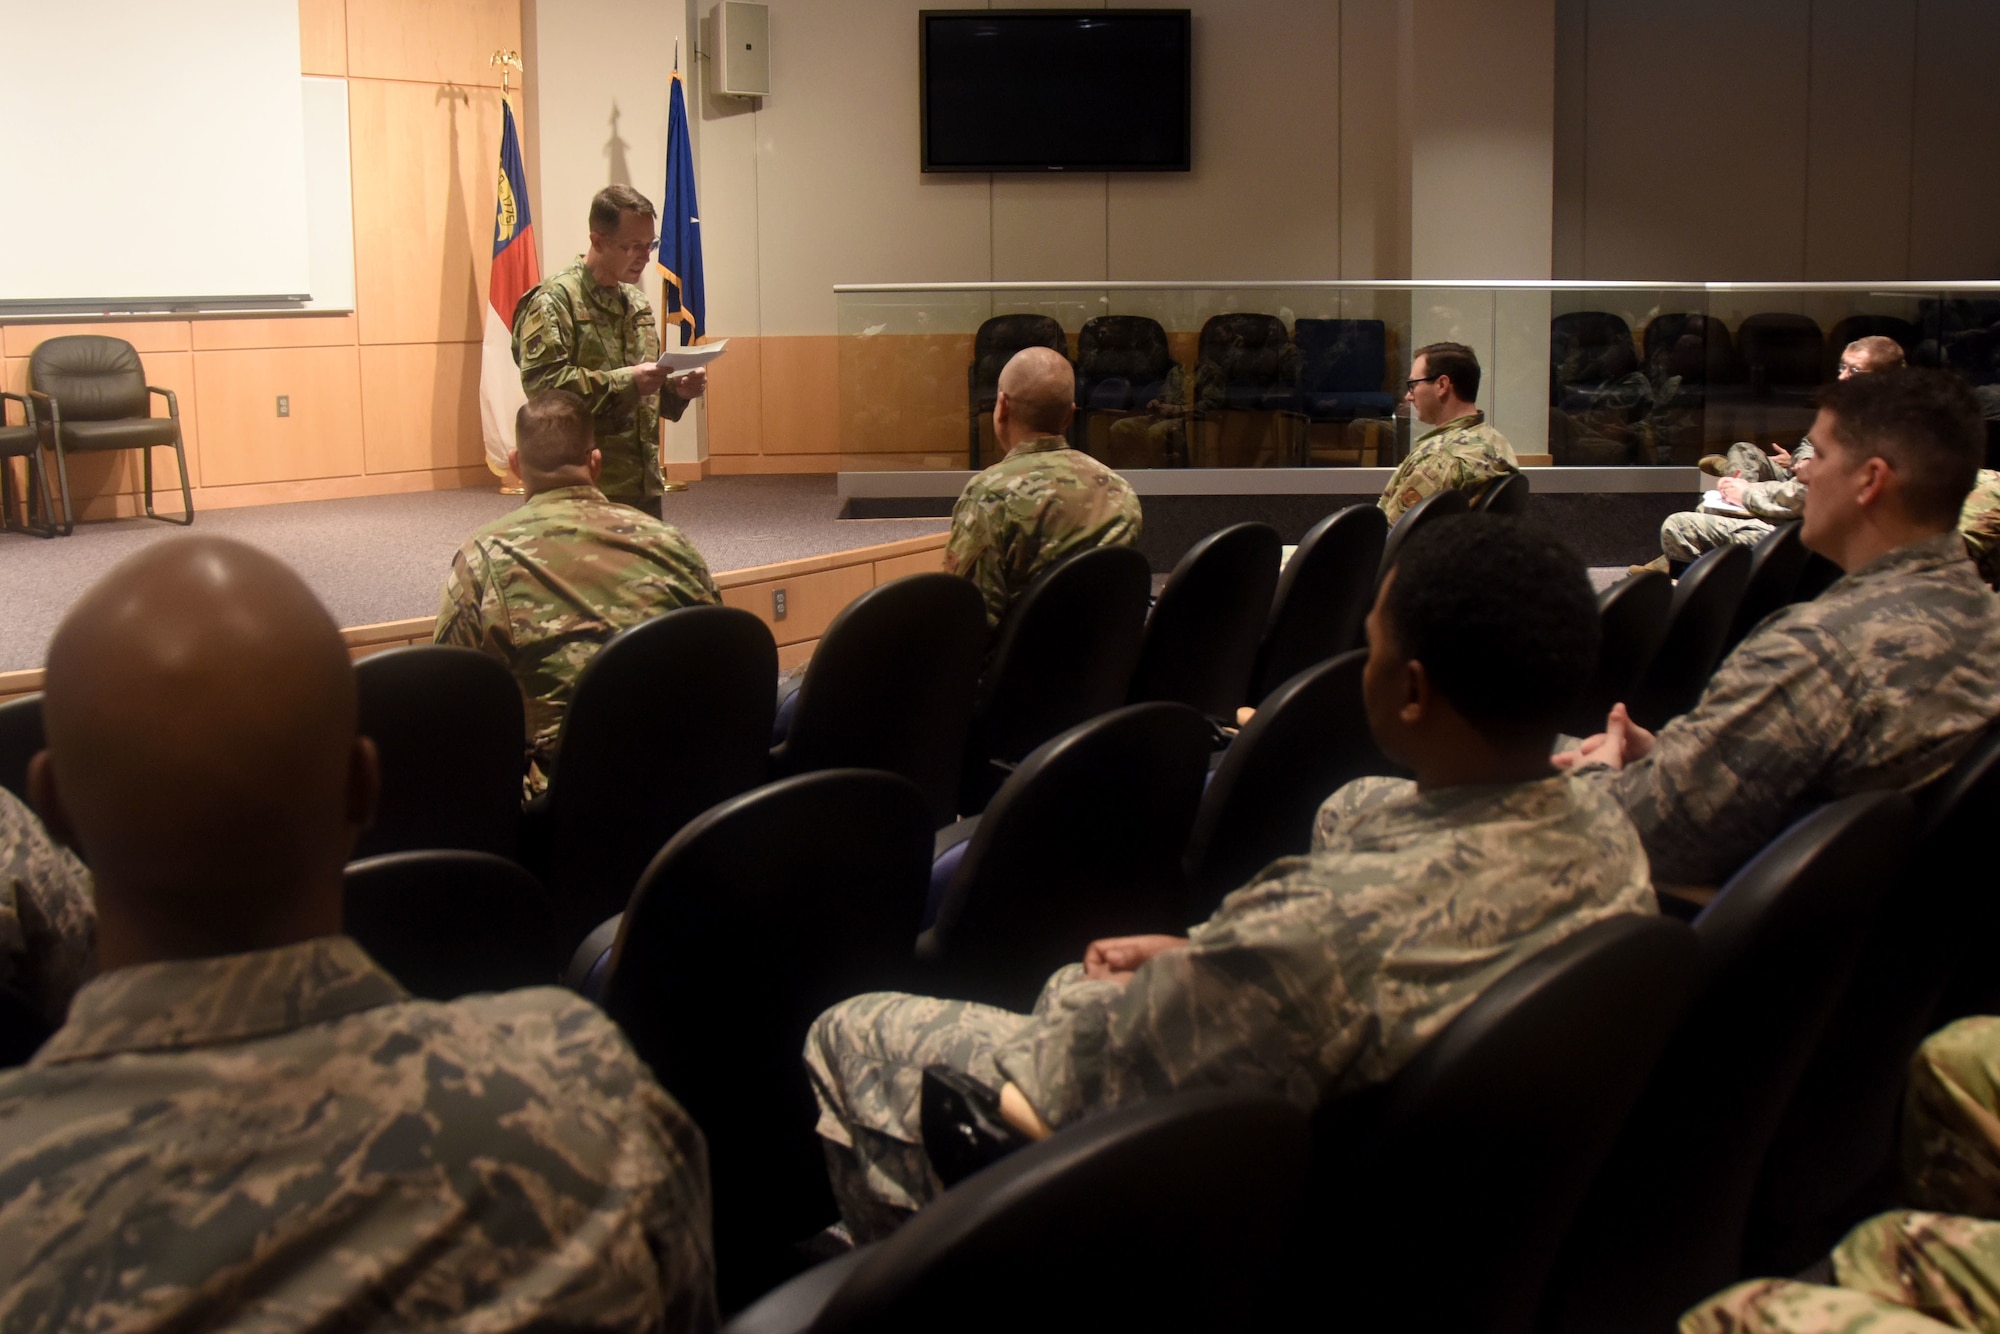 Members of the North Carolina Air National Guard listen as U.S. Air Force North Carolina Assistant Adjutant General for Air, Brig. Gen. Stephen Mallette delivers a speech before presenting Master Sgt. Daniel Judd and Master Sgt. Kernice Locklear, 263rd Combat Communications Squadron with awards during an all-call held at the New London, N.C. Air National Guard Base (NCANG) headquarters, Jan. 12, 2020. Members of the NCANG celebrated the accomplishments of Master Sgts. Judd and Locklear who attended the United States Marine Corps Staff Non-Commissioned Officer Academy last year in an effort to better understand the traditions and customs of a sister service. Since attending the academies, Judd and Locklear have implemented U.S. Marine Corps. practices such as sharing unit history and helping newer Airmen feel more involved with more responsibilities.